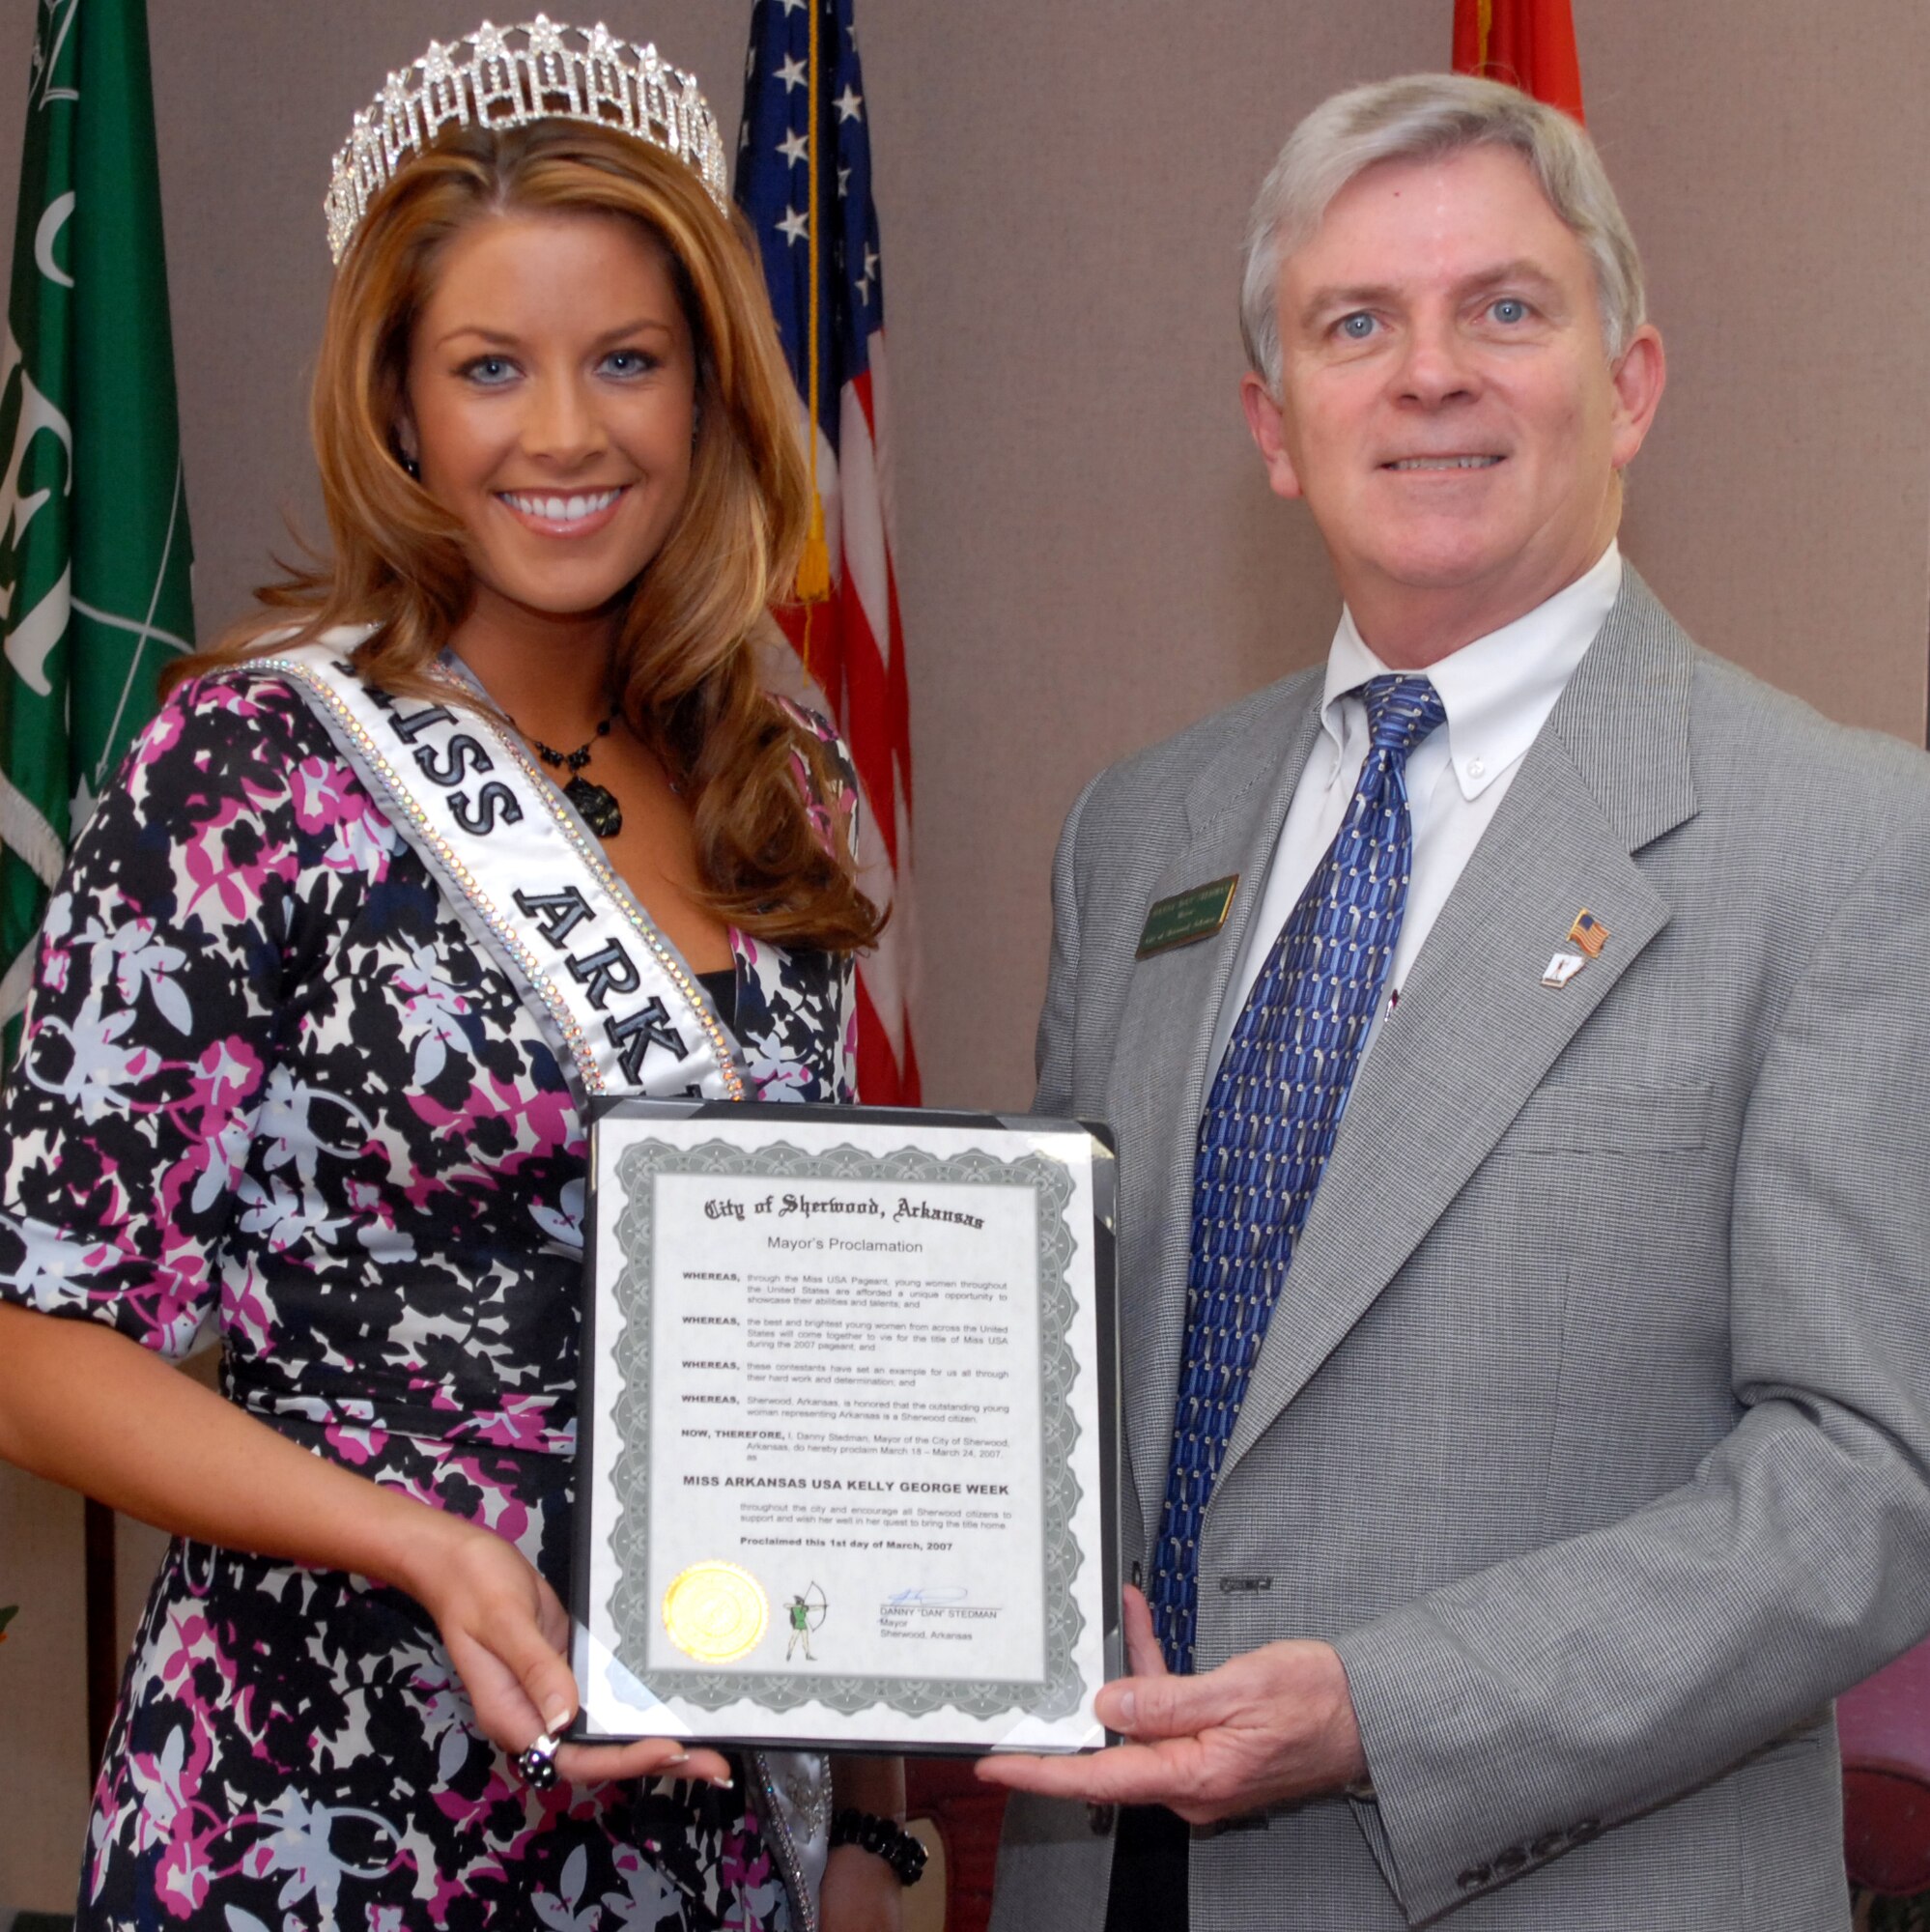 Sherwood Mayor Dan Stedman presents Second Lt. Kelly George, Miss Arkansas USA, a proclamation declaring March 19-24 as "Miss Arkansas USA Kelly George Week" March 1. During her send-off event the evening March 1, Lieutenant George was presented with a key to the city of Sherwood by Mayor Stedman. 
"We are so proud of her and to have her live in Sherwood. She will do great representing Arkansas and our Armed Forces," said Mayor Stedman, a retired Air Force lieutenant colonel. "We wish her well and hope she brings the title home to Arkansas."